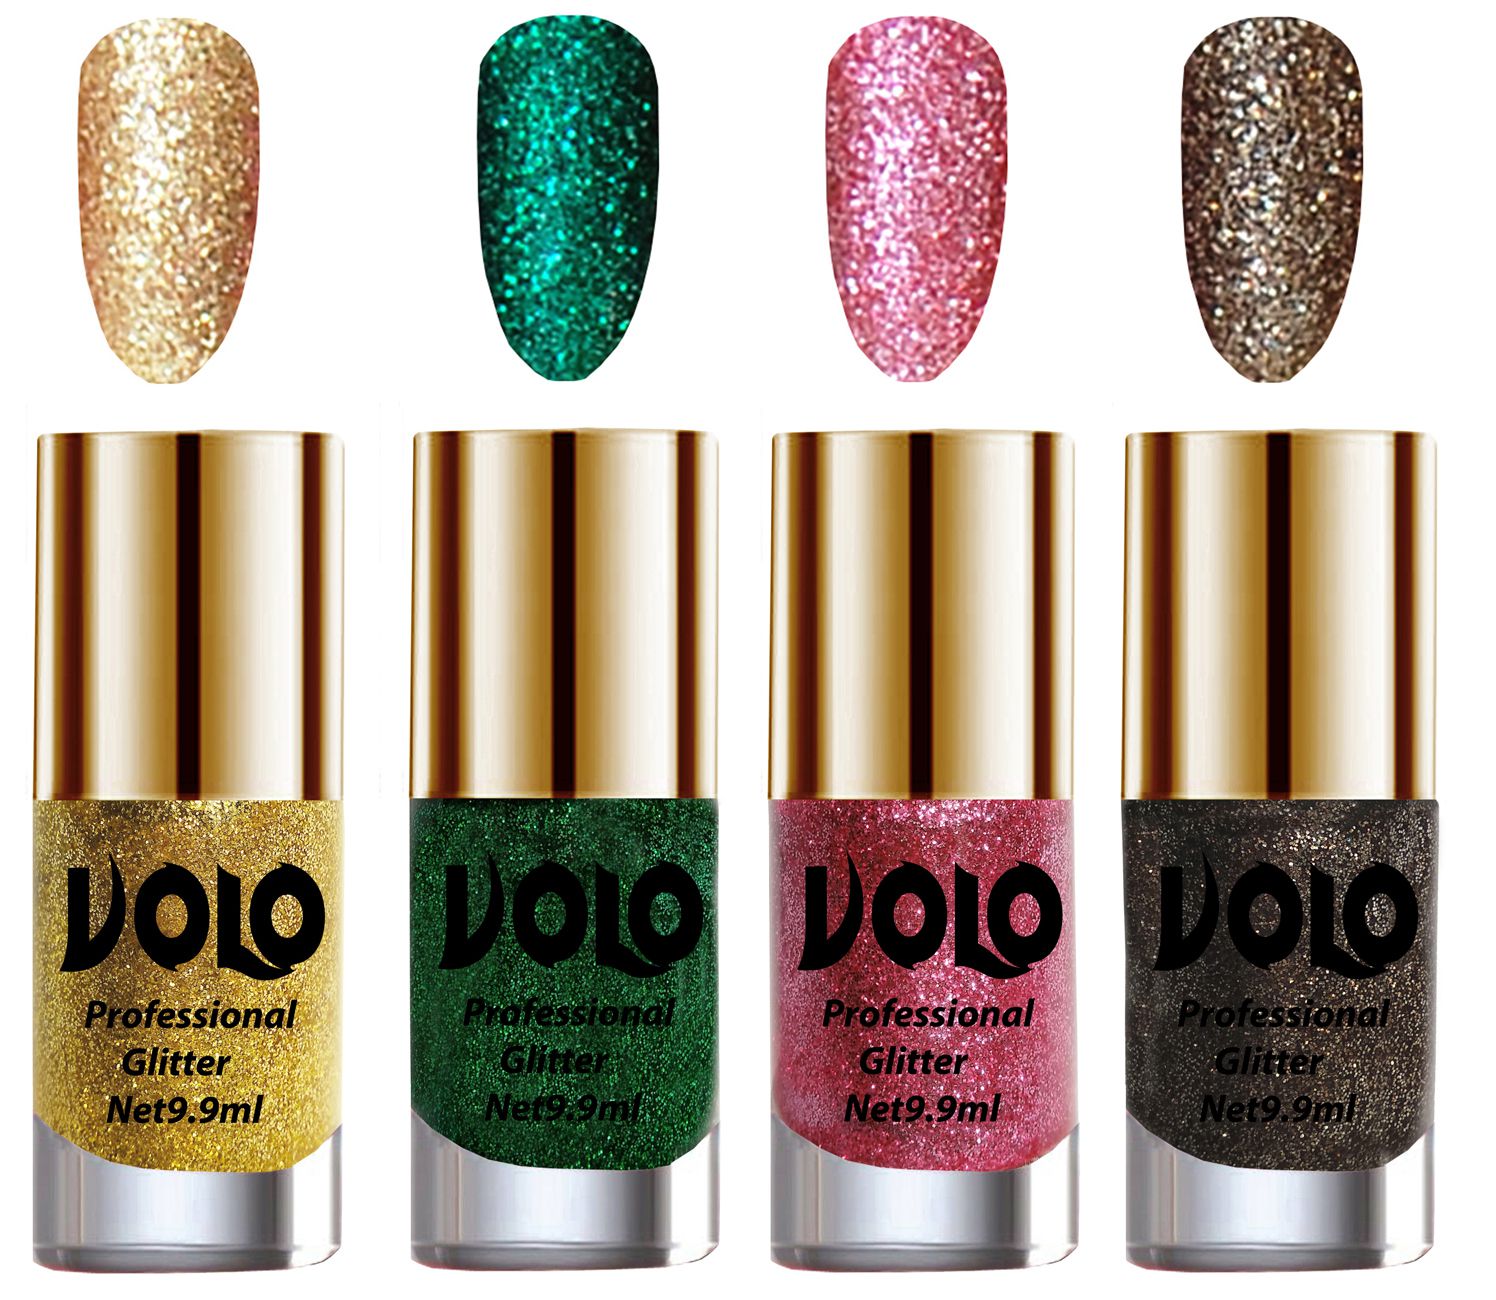     			VOLO Professionally Used Glitter Shine Nail Polish Gold,Green,Pink Grey Pack of 4 39 mL